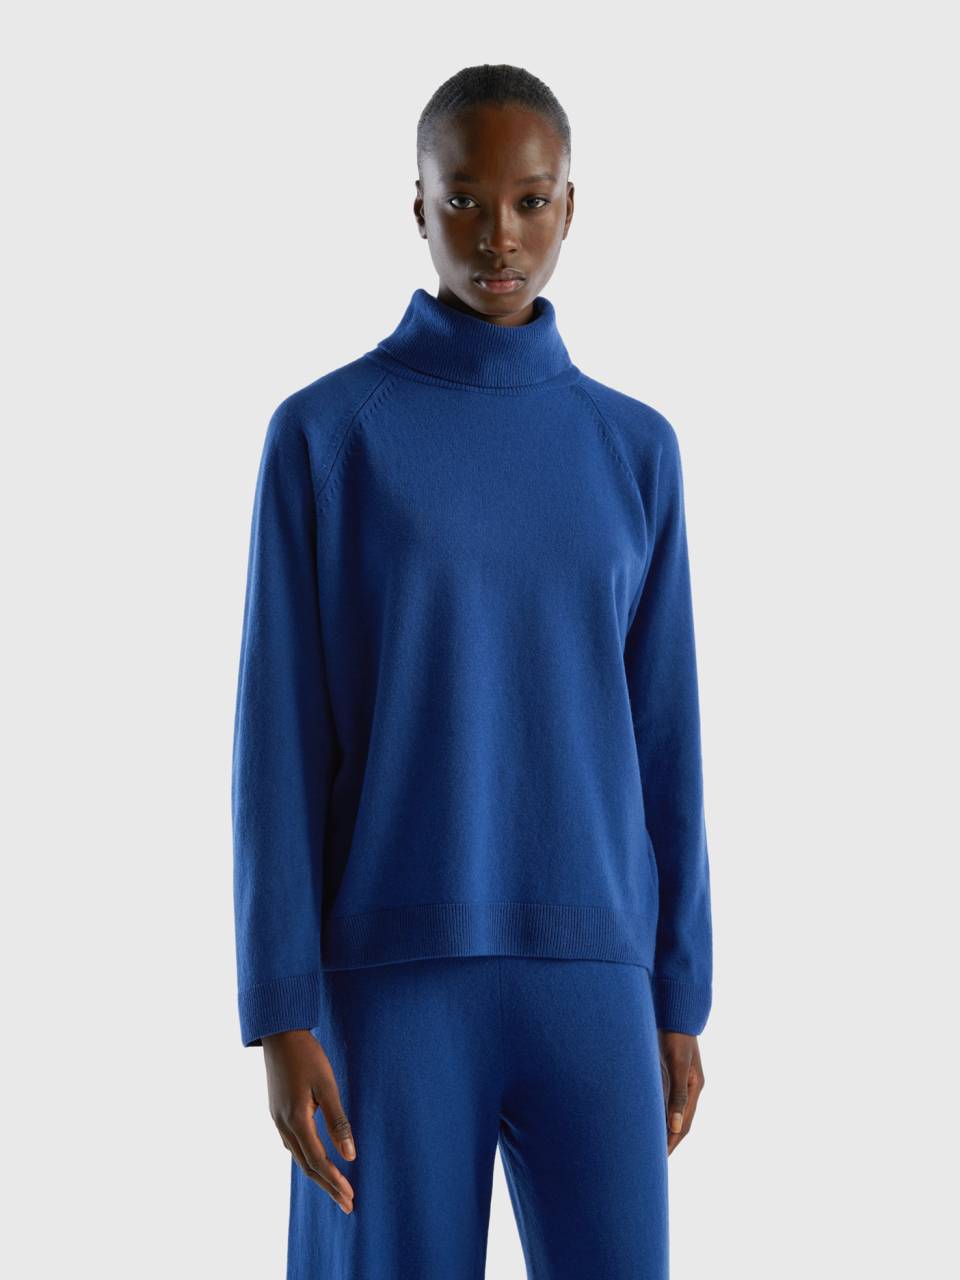 Benetton midnight blue turtleneck in wool and cashmere blend. 1